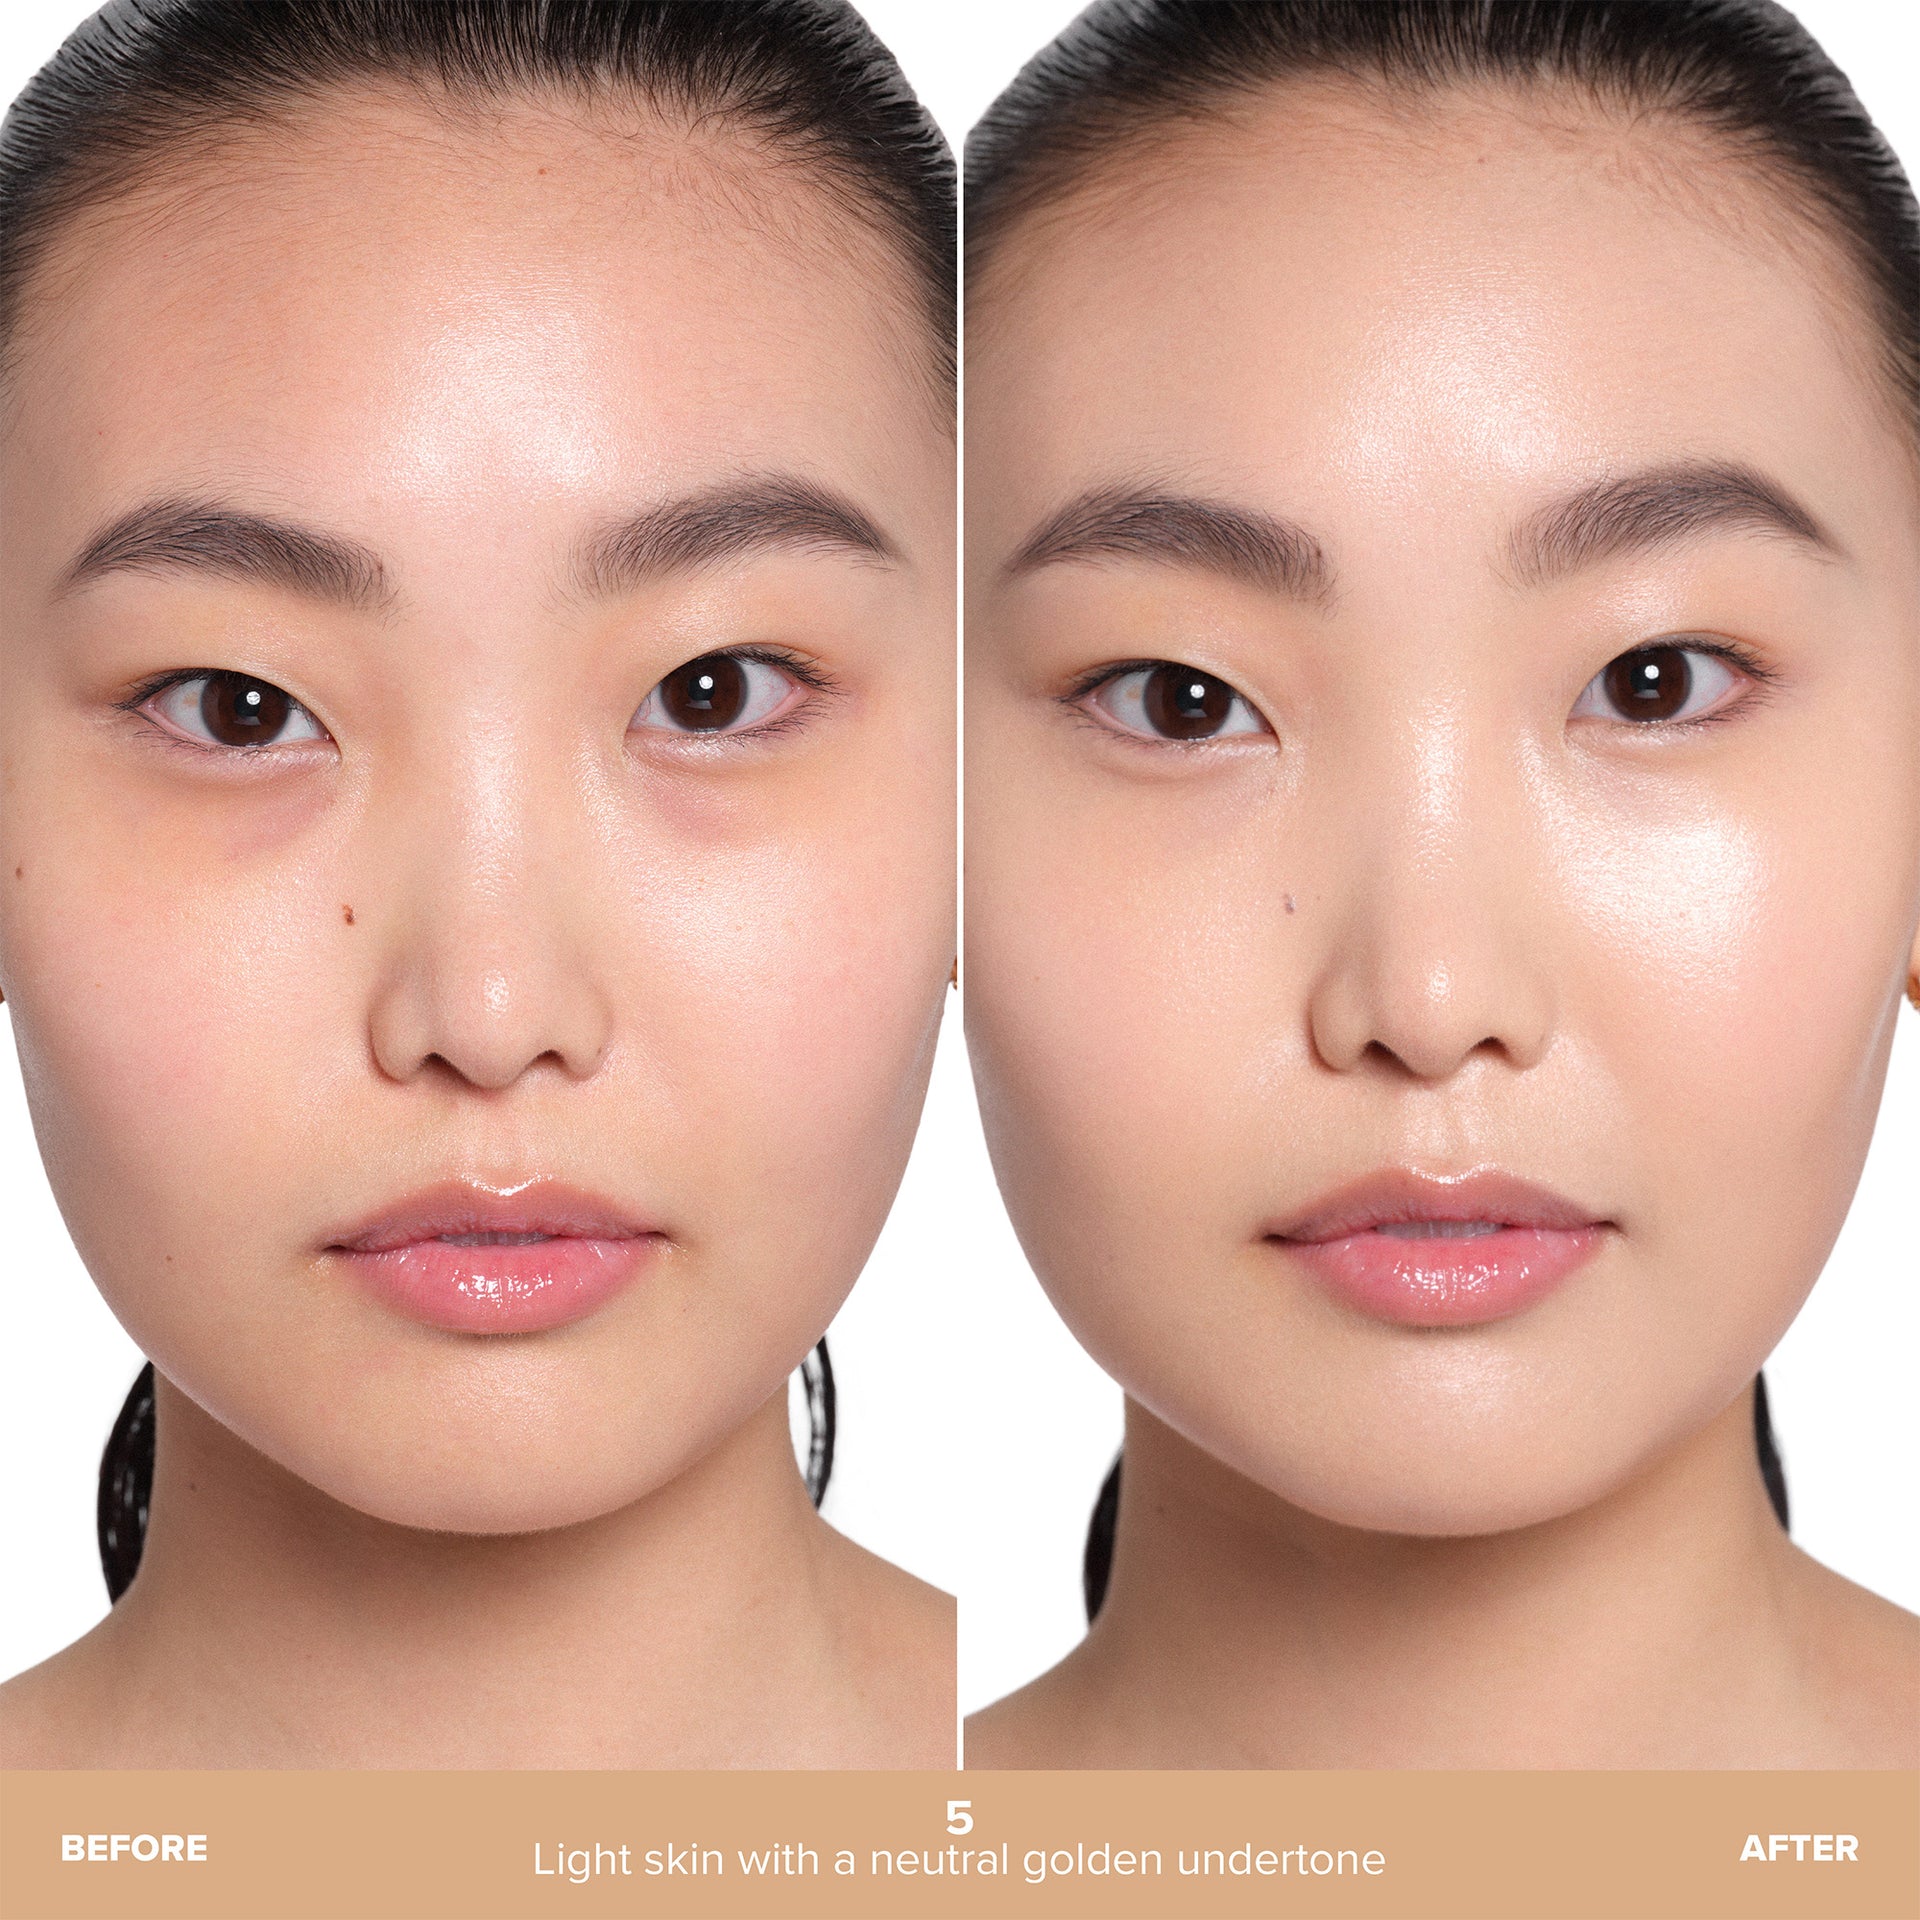 Shade 5 | Beauty Balm Serum Boosted Skin Tint Before & After - Shade 5